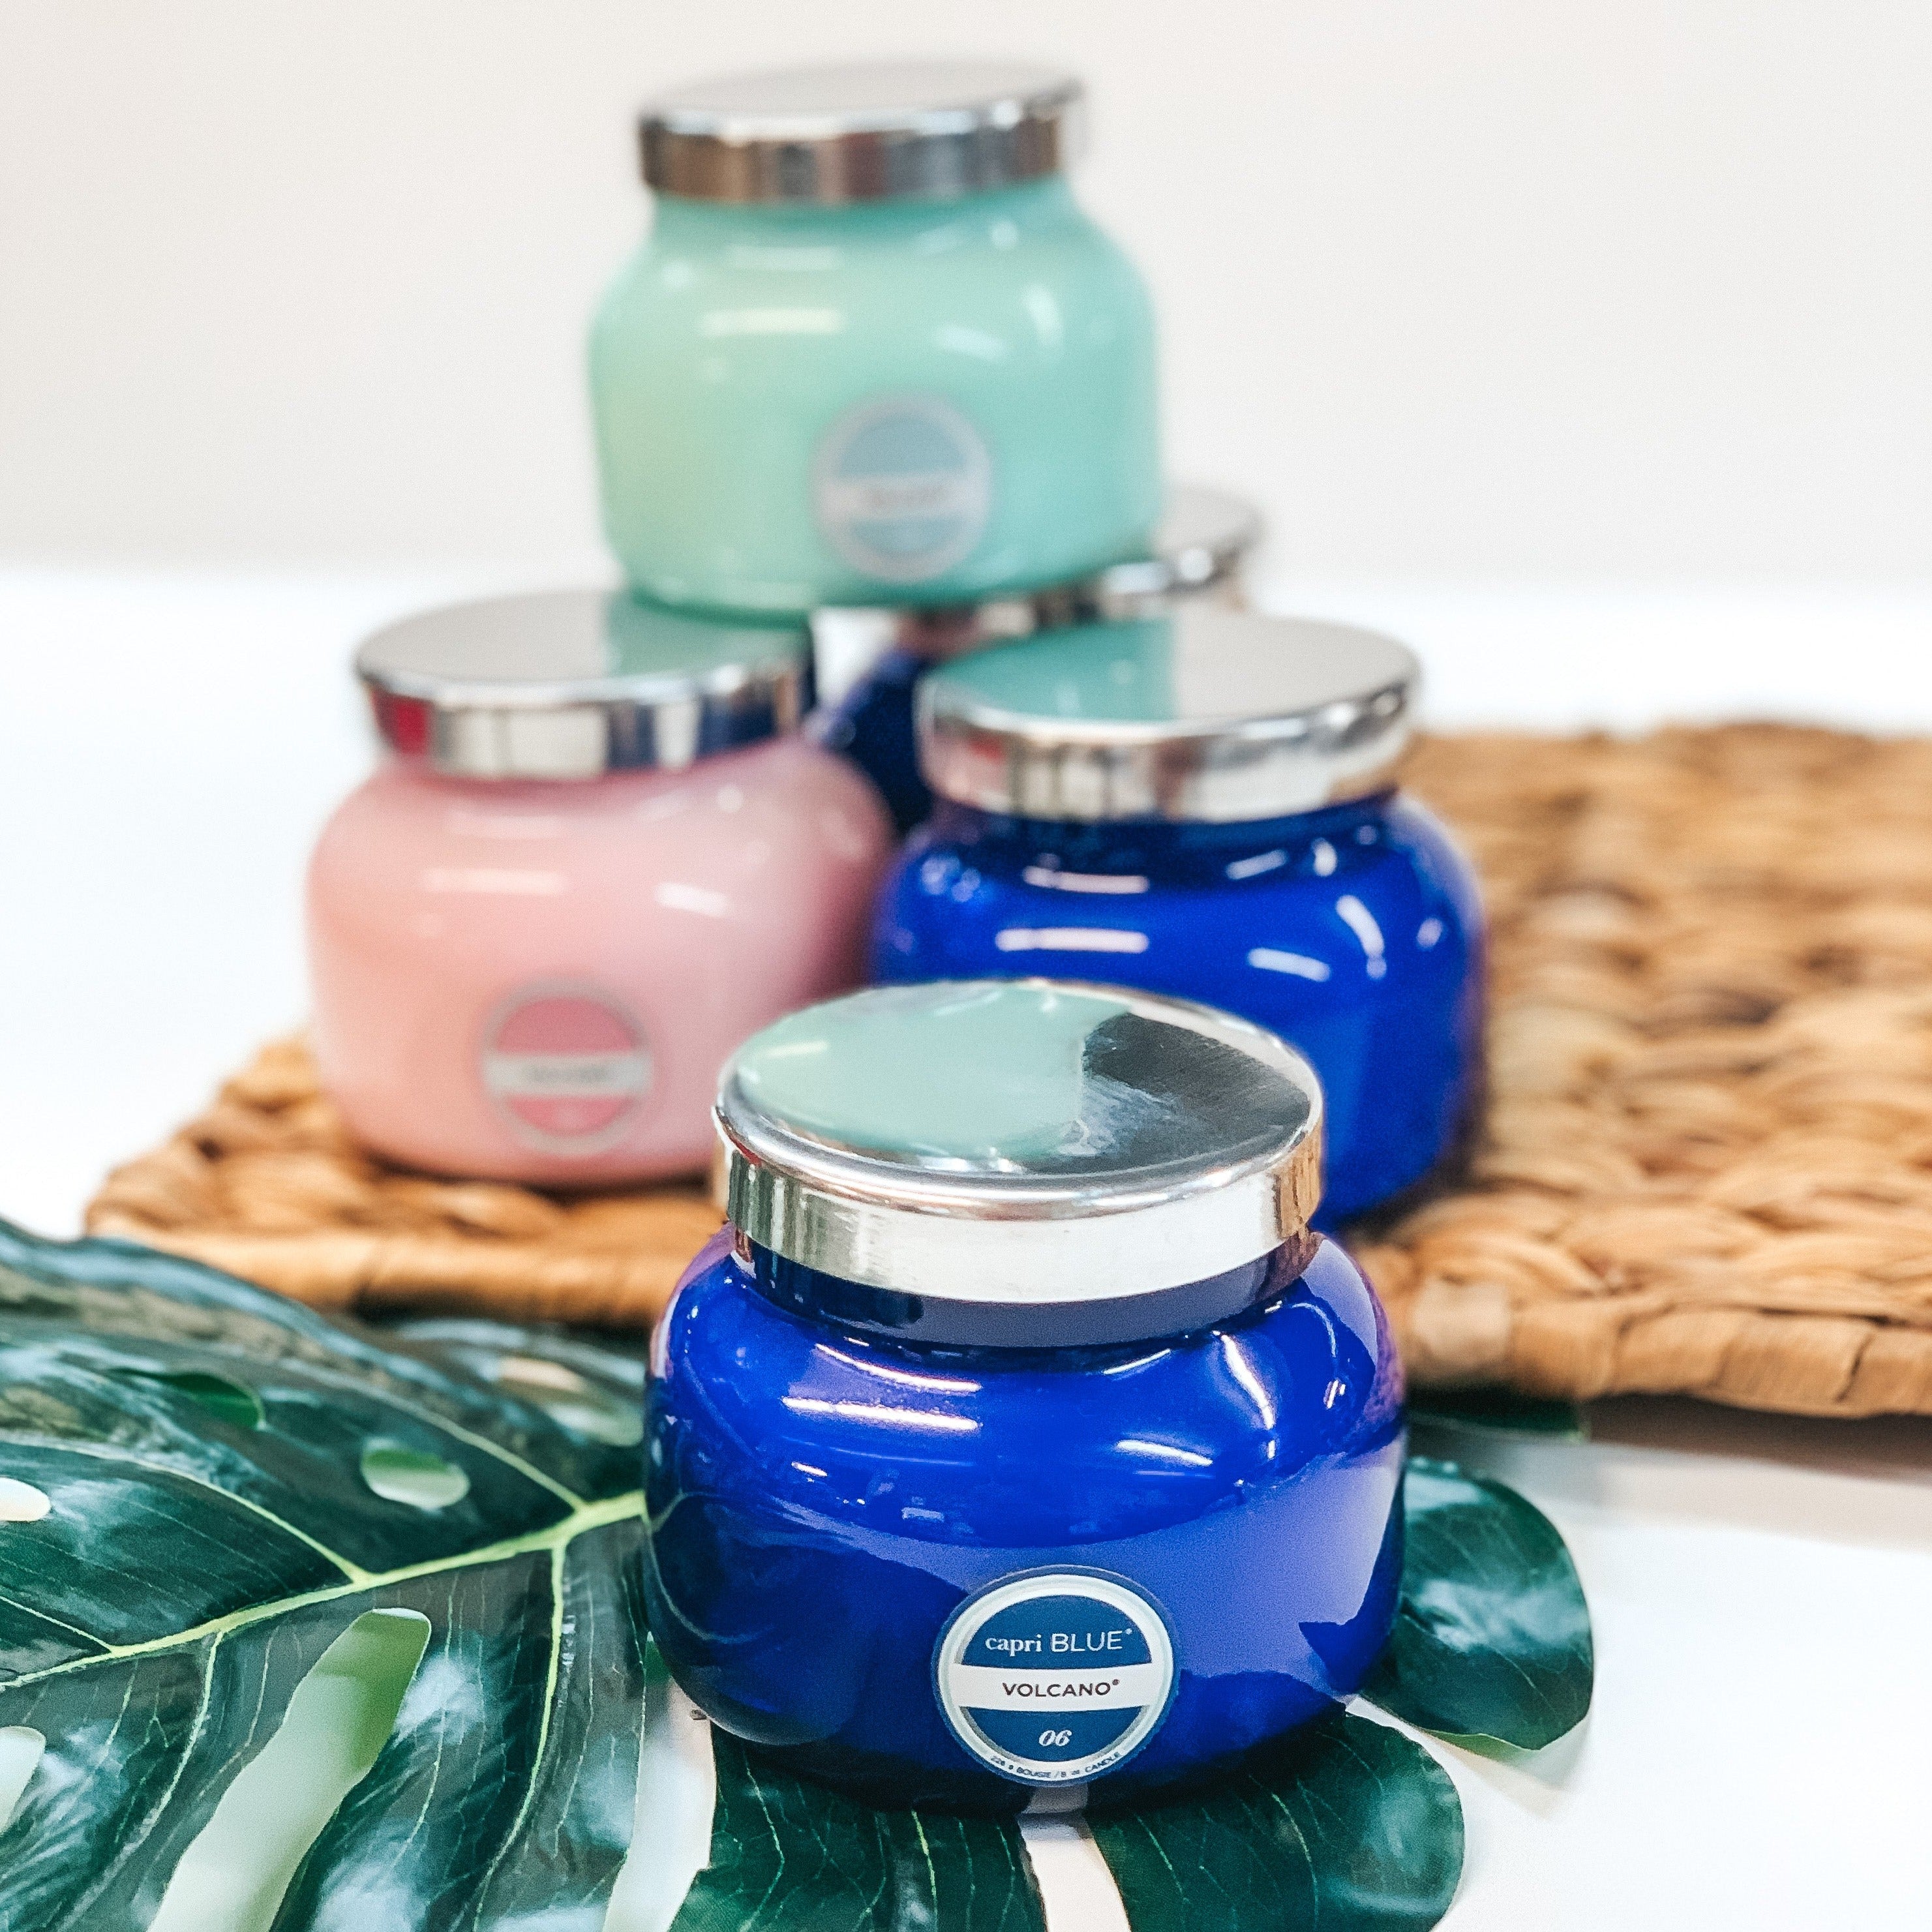 The Capri Blue Volcano Scent Inspired Candle is Under $15